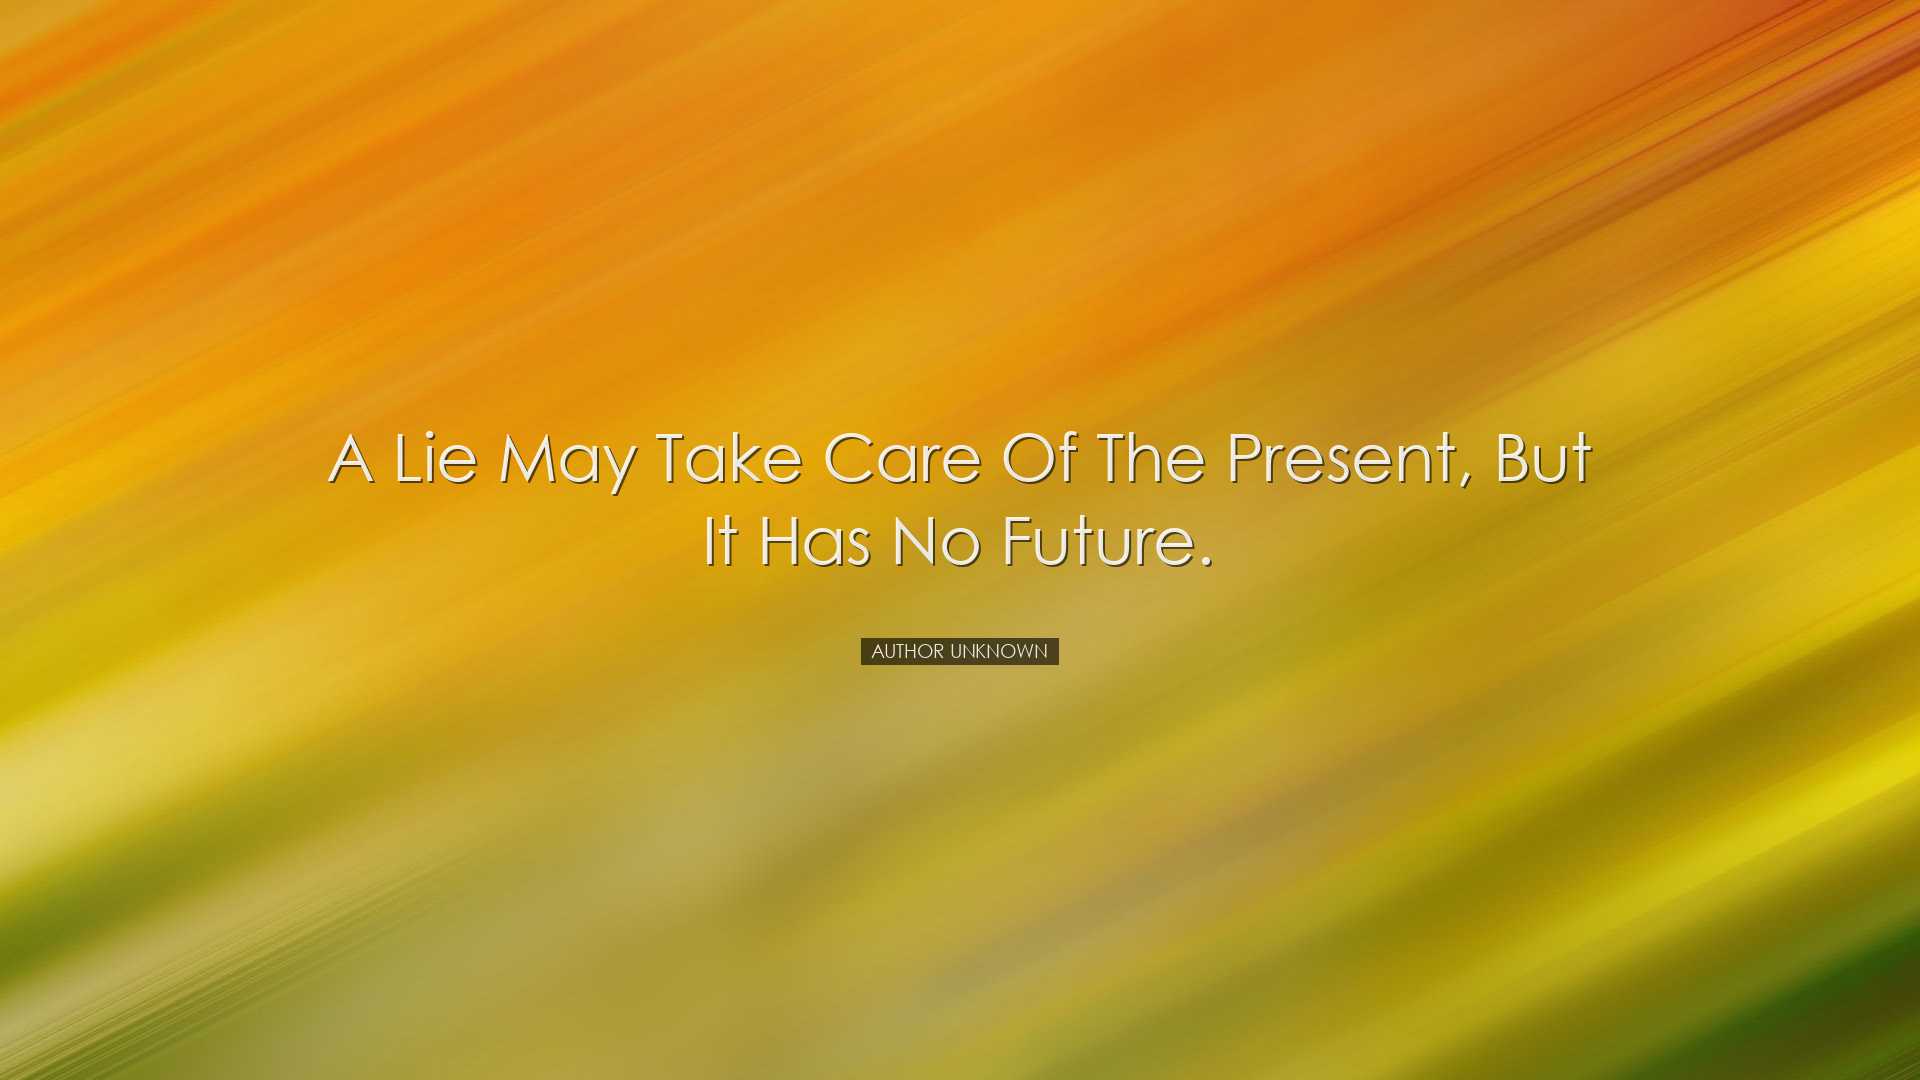 A lie may take care of the present, but it has no future. - Author